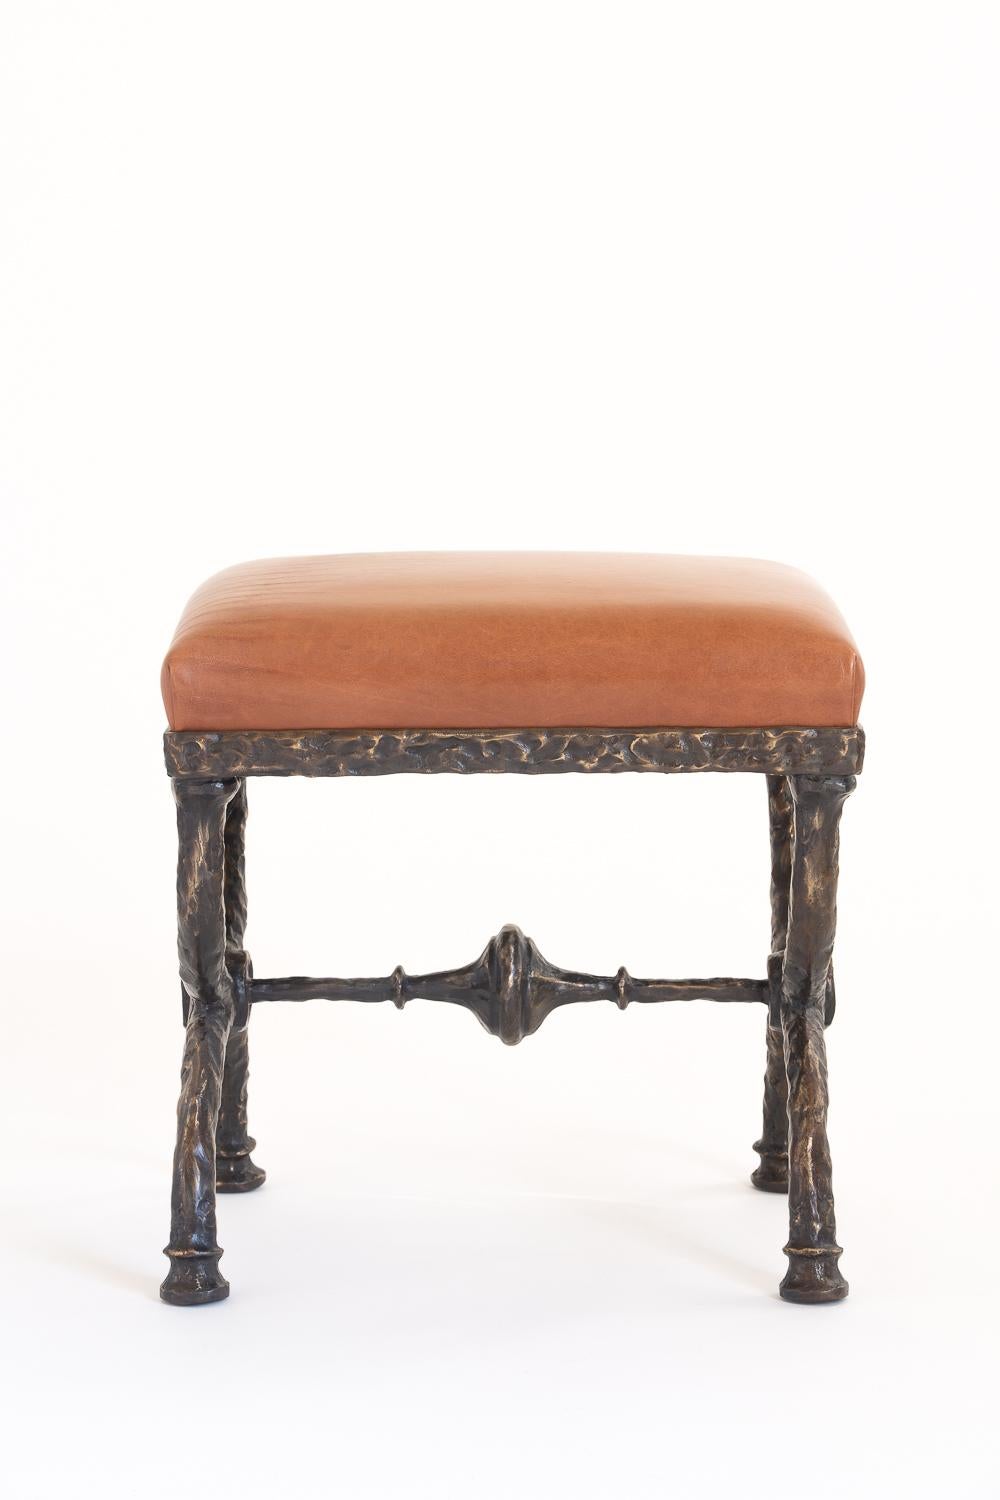 American Bronze Stool with Upholstered Brown or Black Leather Seat For Sale